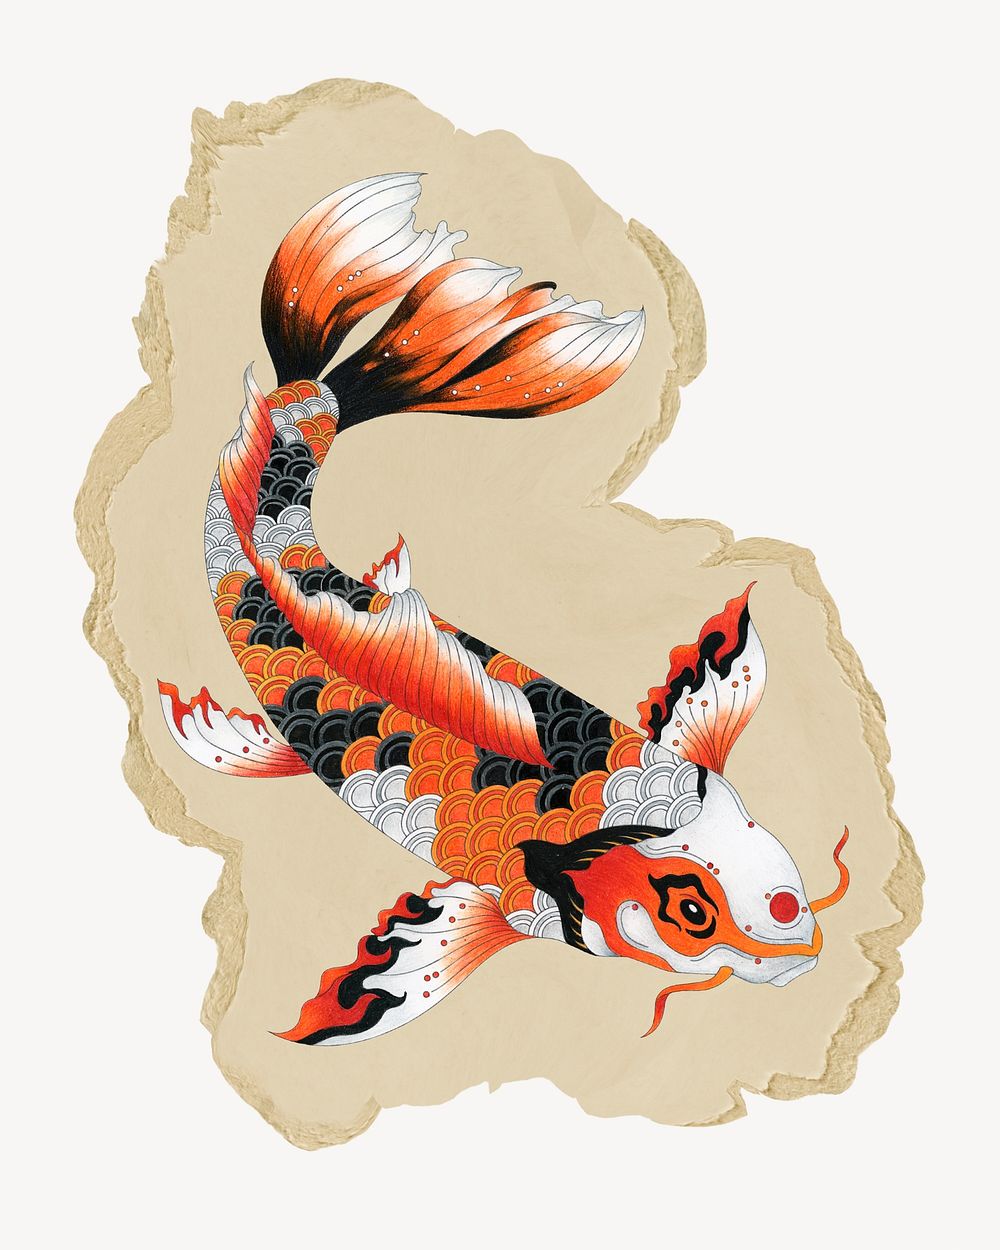 Japanese koi fish, ripped paper collage element